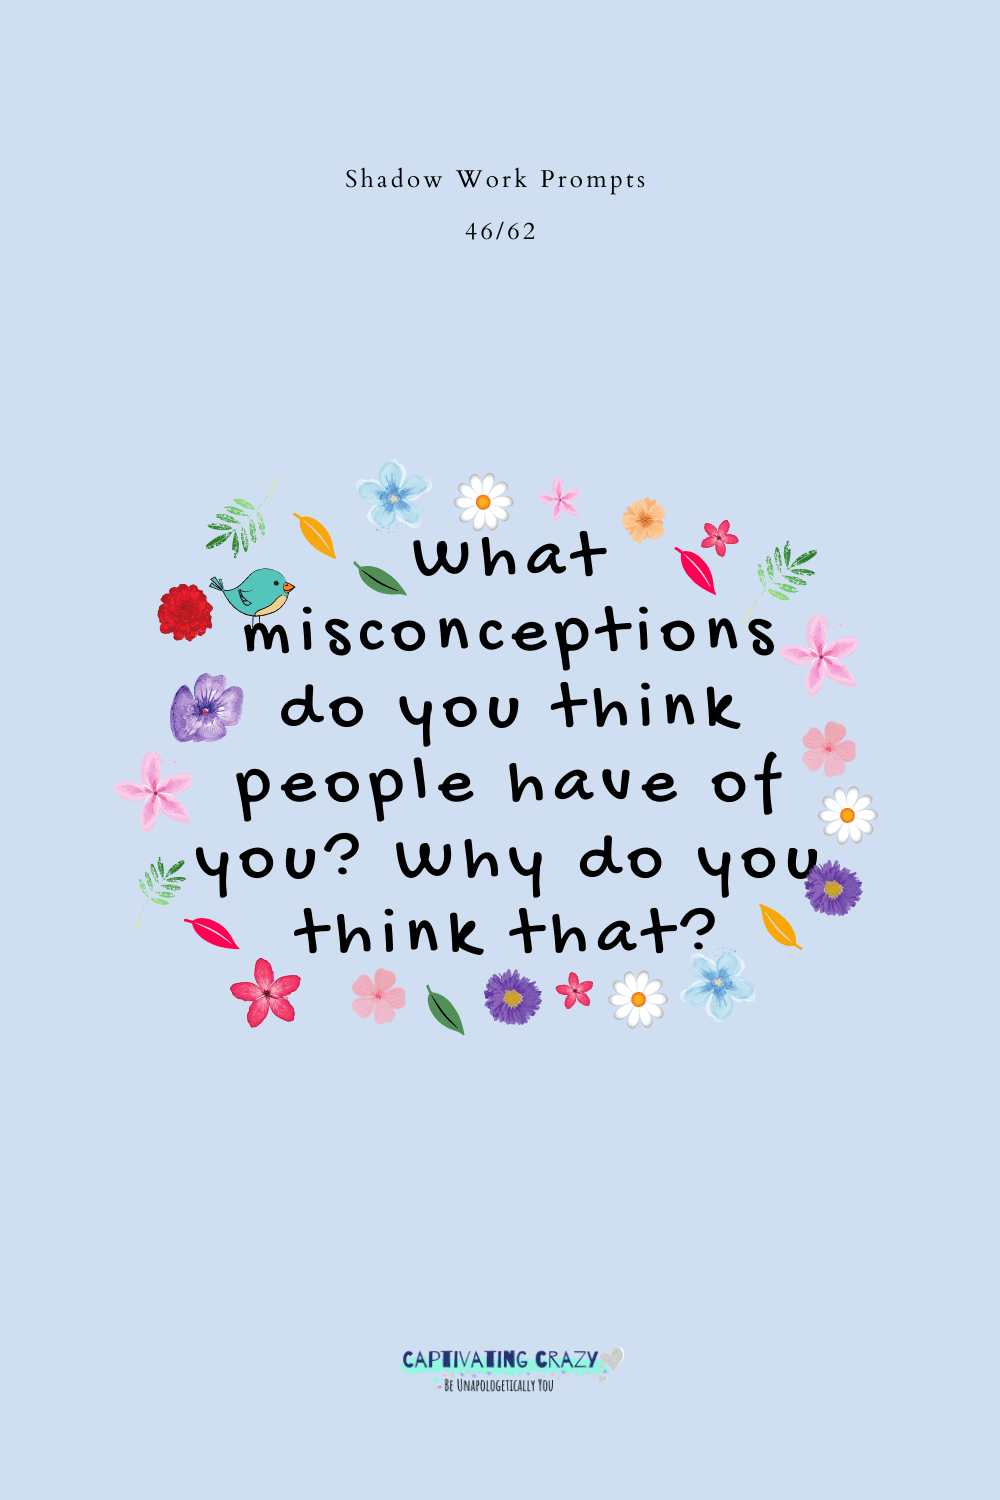 What misconceptions do you think people have of you? Why do you think that?